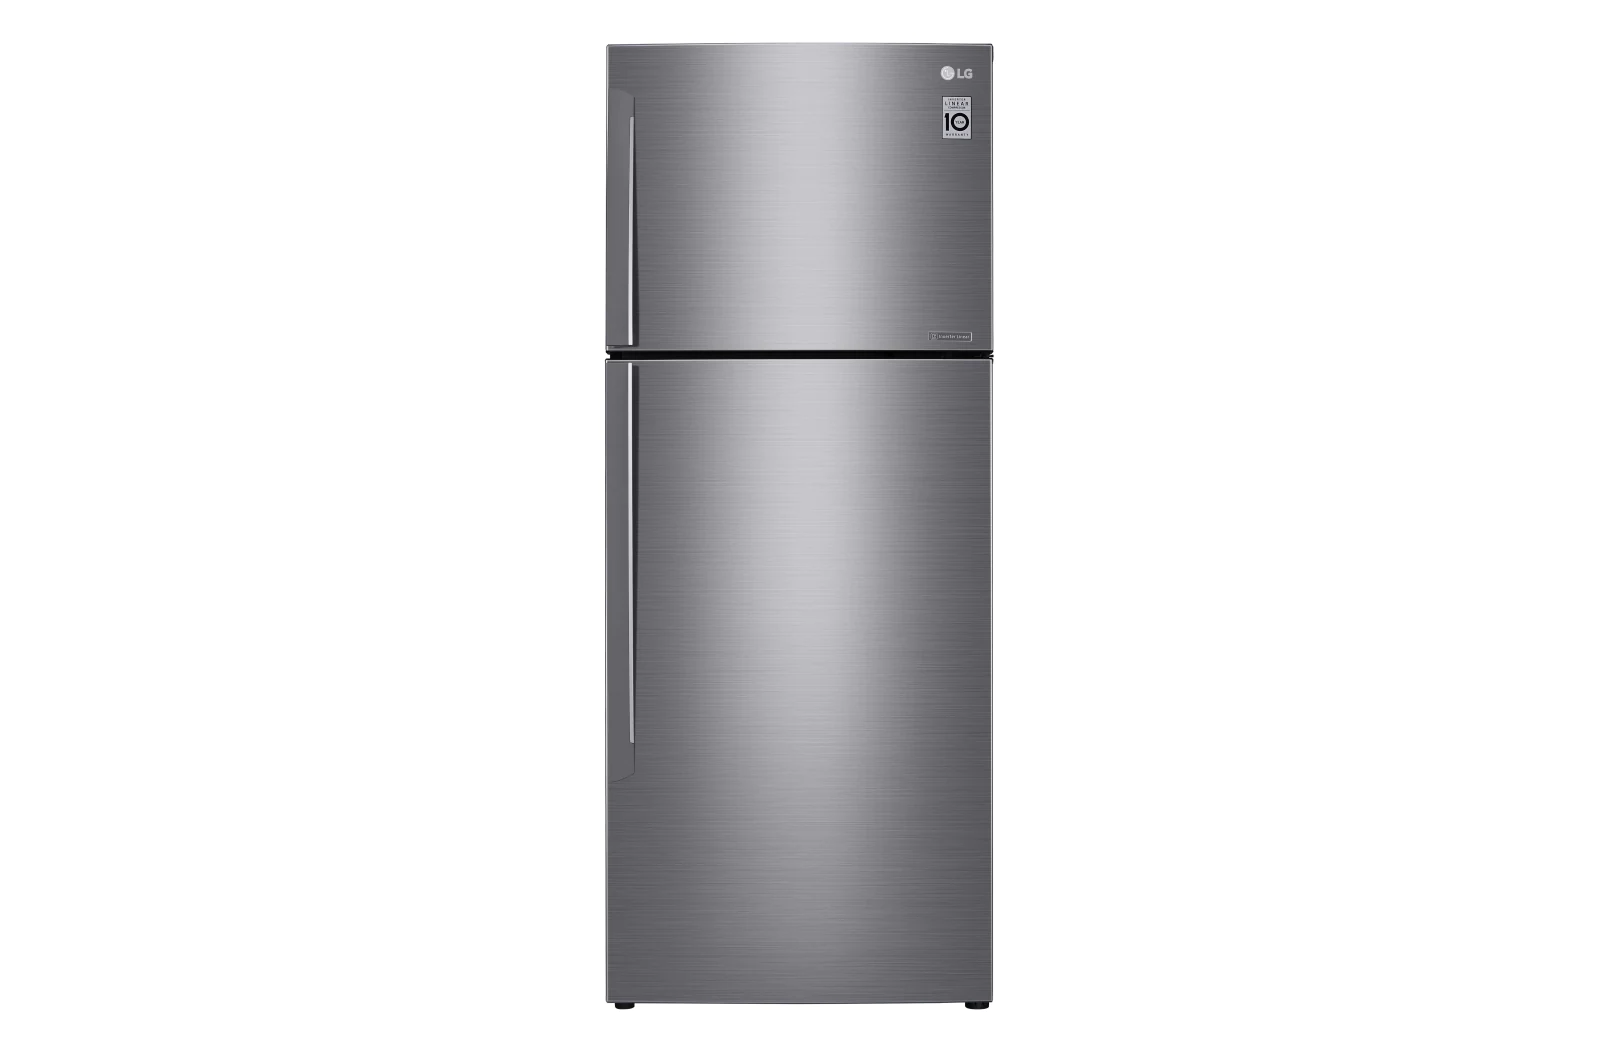 LG 471L Refrigerator With DoorCooling+™ Technology - Silver